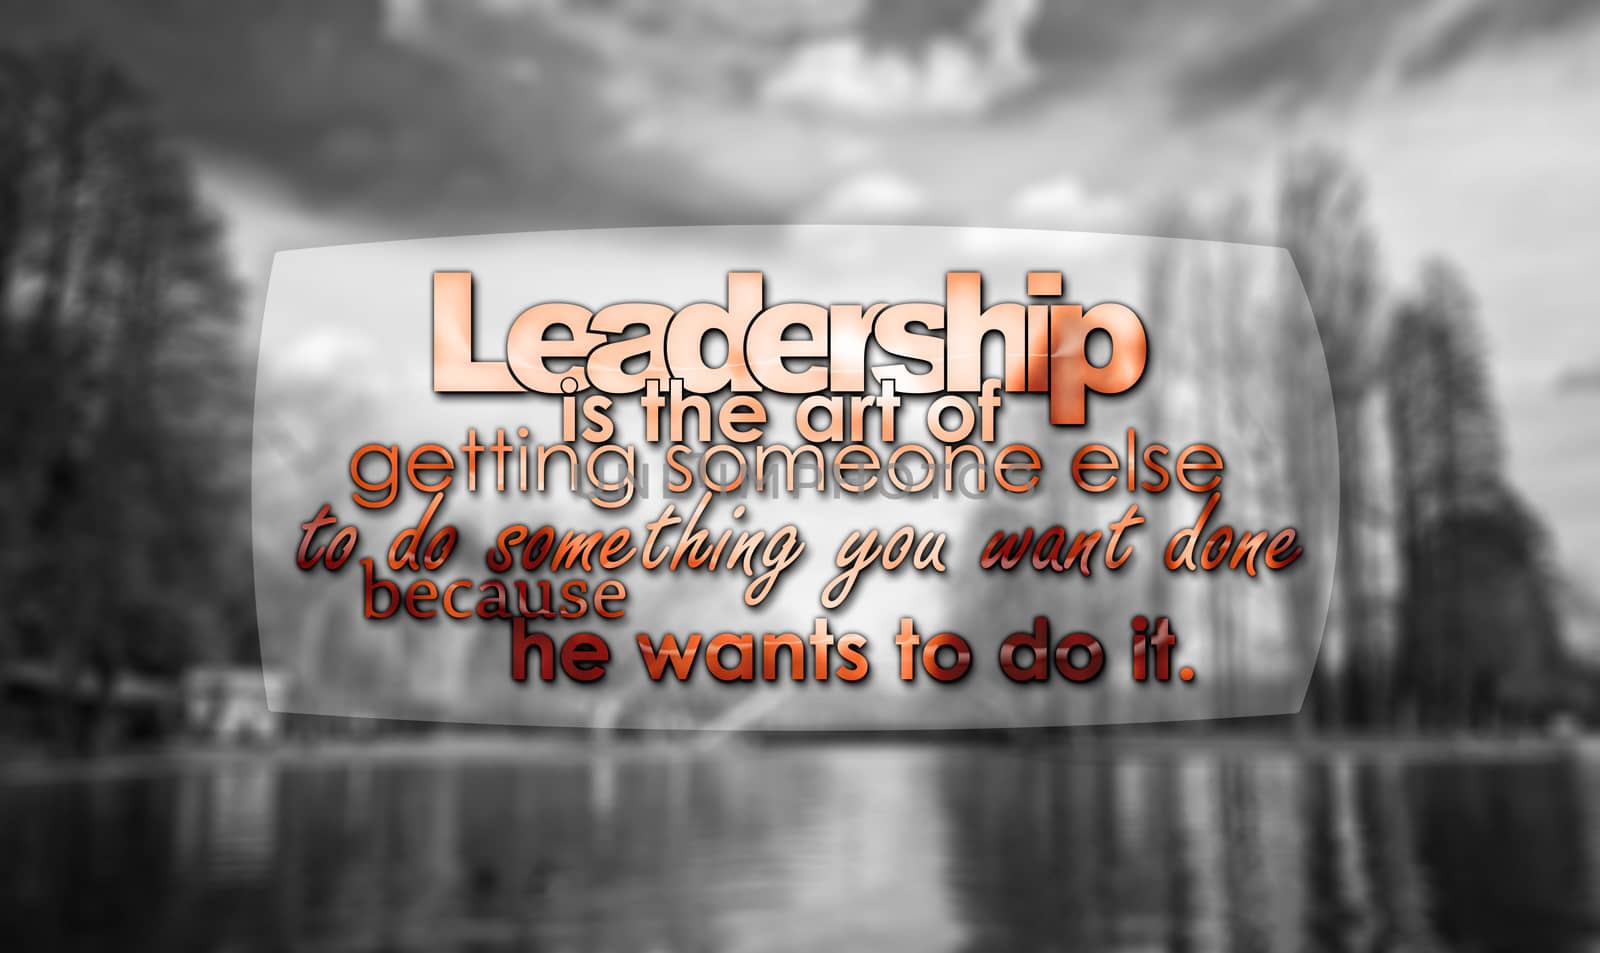 Leadership is the art of getting someone else to do something you want done because he wants to do it. Motivational Background